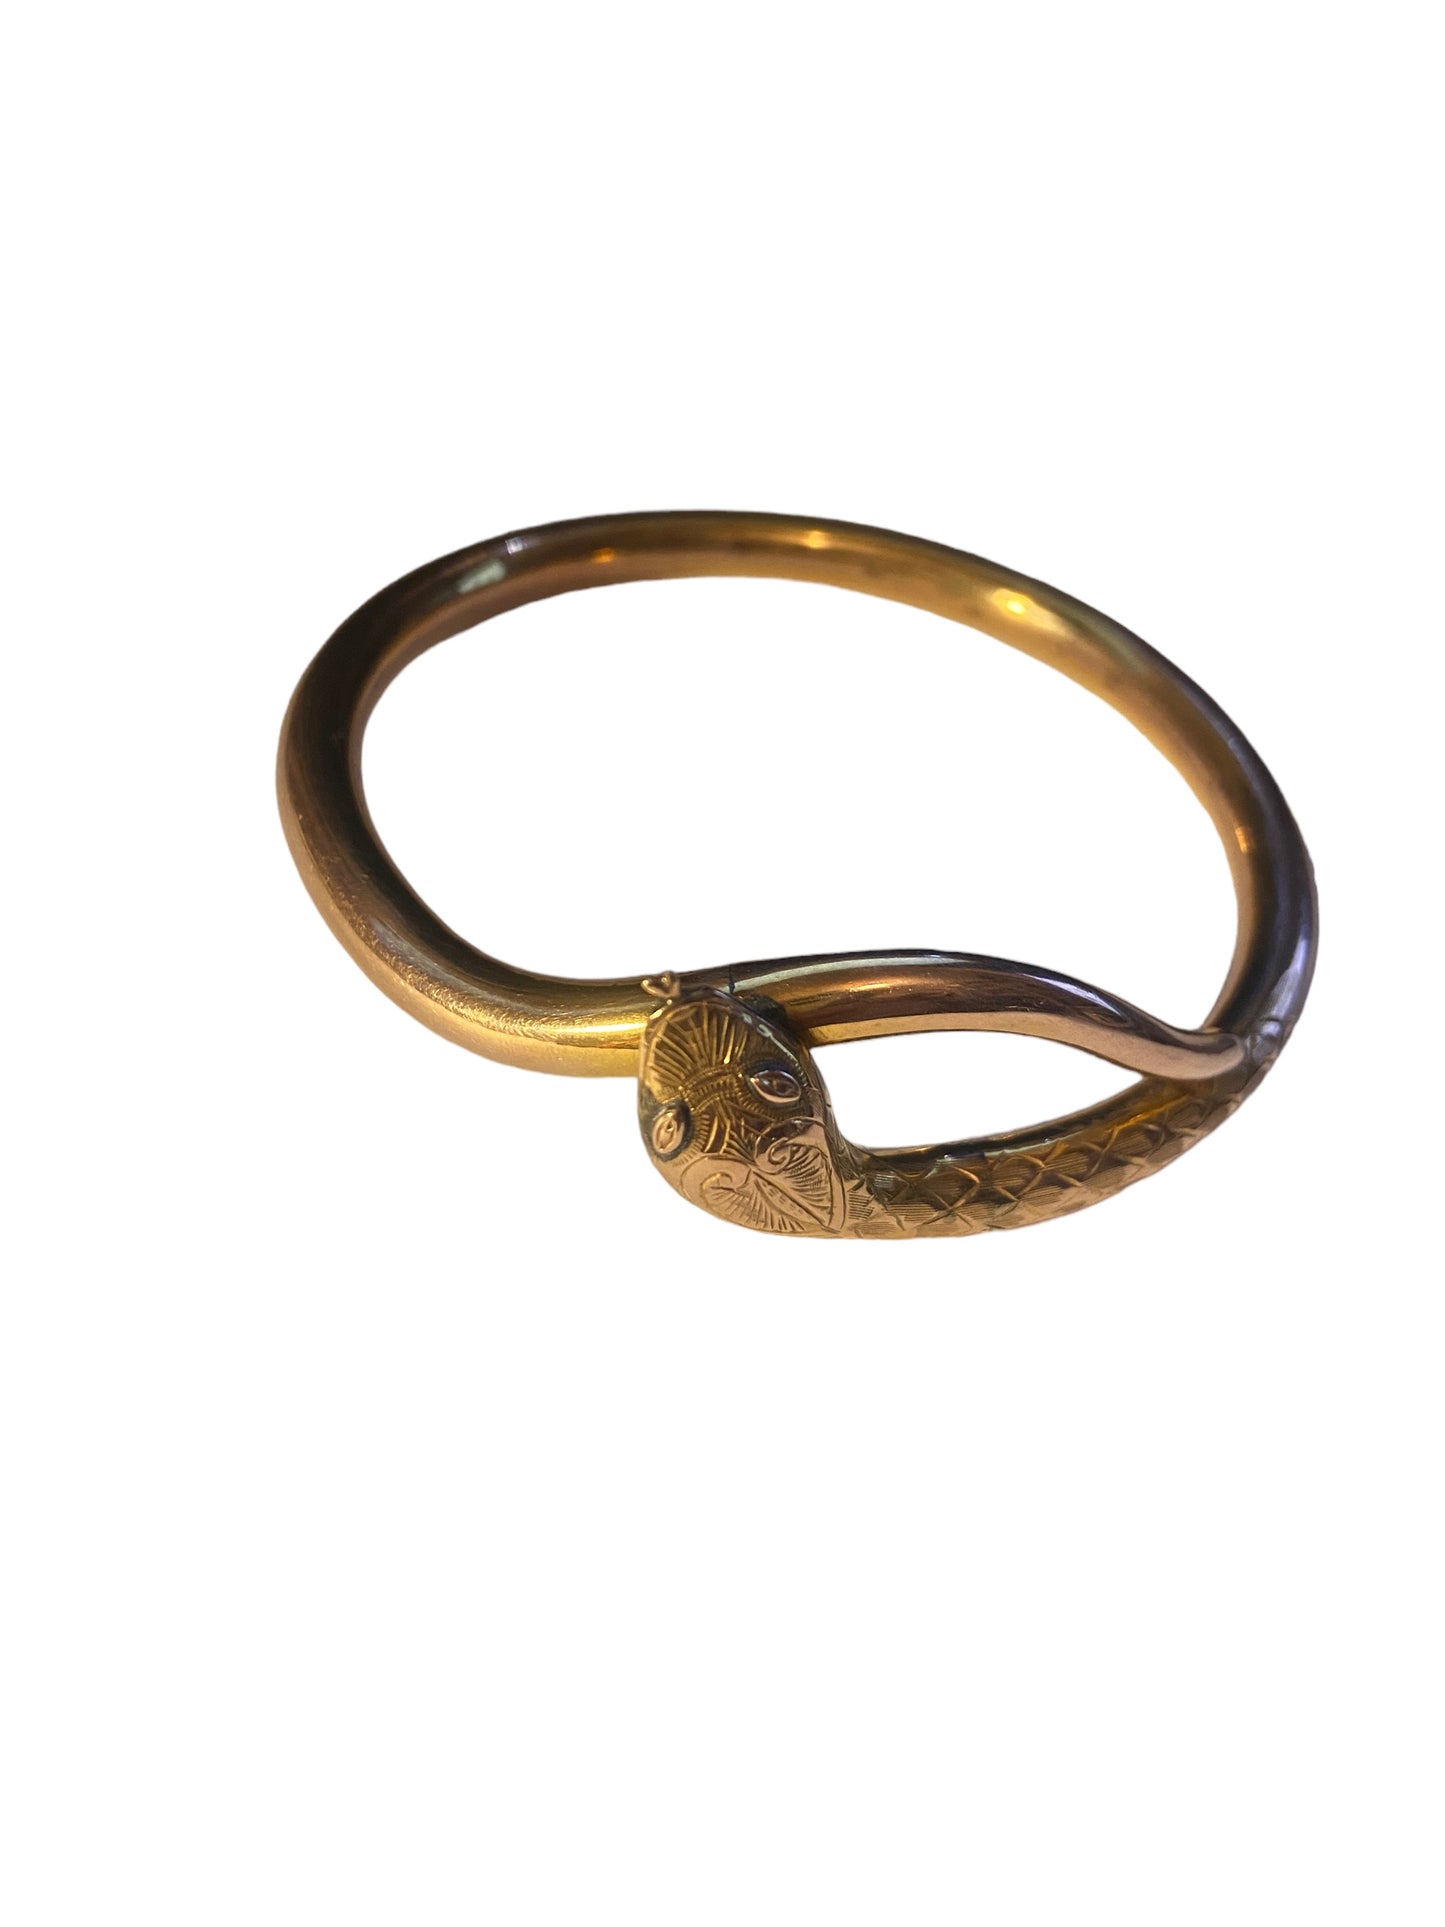 9ct vintage snake slave bangle by Smith and Pepper 11.2g